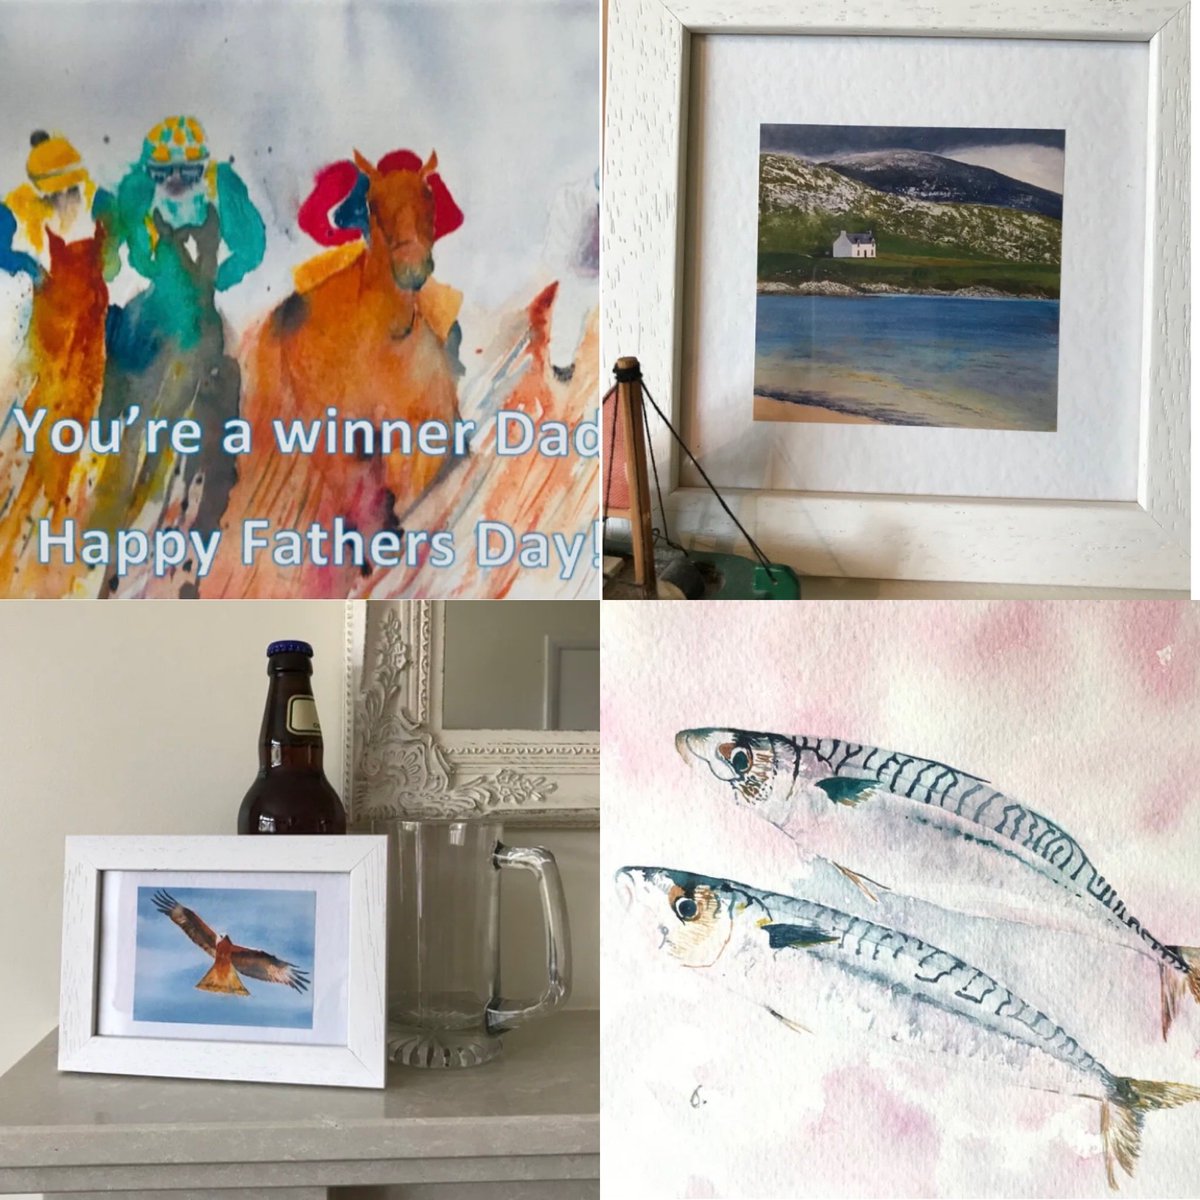 Here’s a selection of gifts and cards for Fathers Day #EarlyBiz I have more choices so do pop in for a browse cardsbymormorjan.etsy.com #MHHSBD #SBS #SMILEtt23 ⁦@CraftBizParty⁩ ⁦@TheCraftersUK⁩